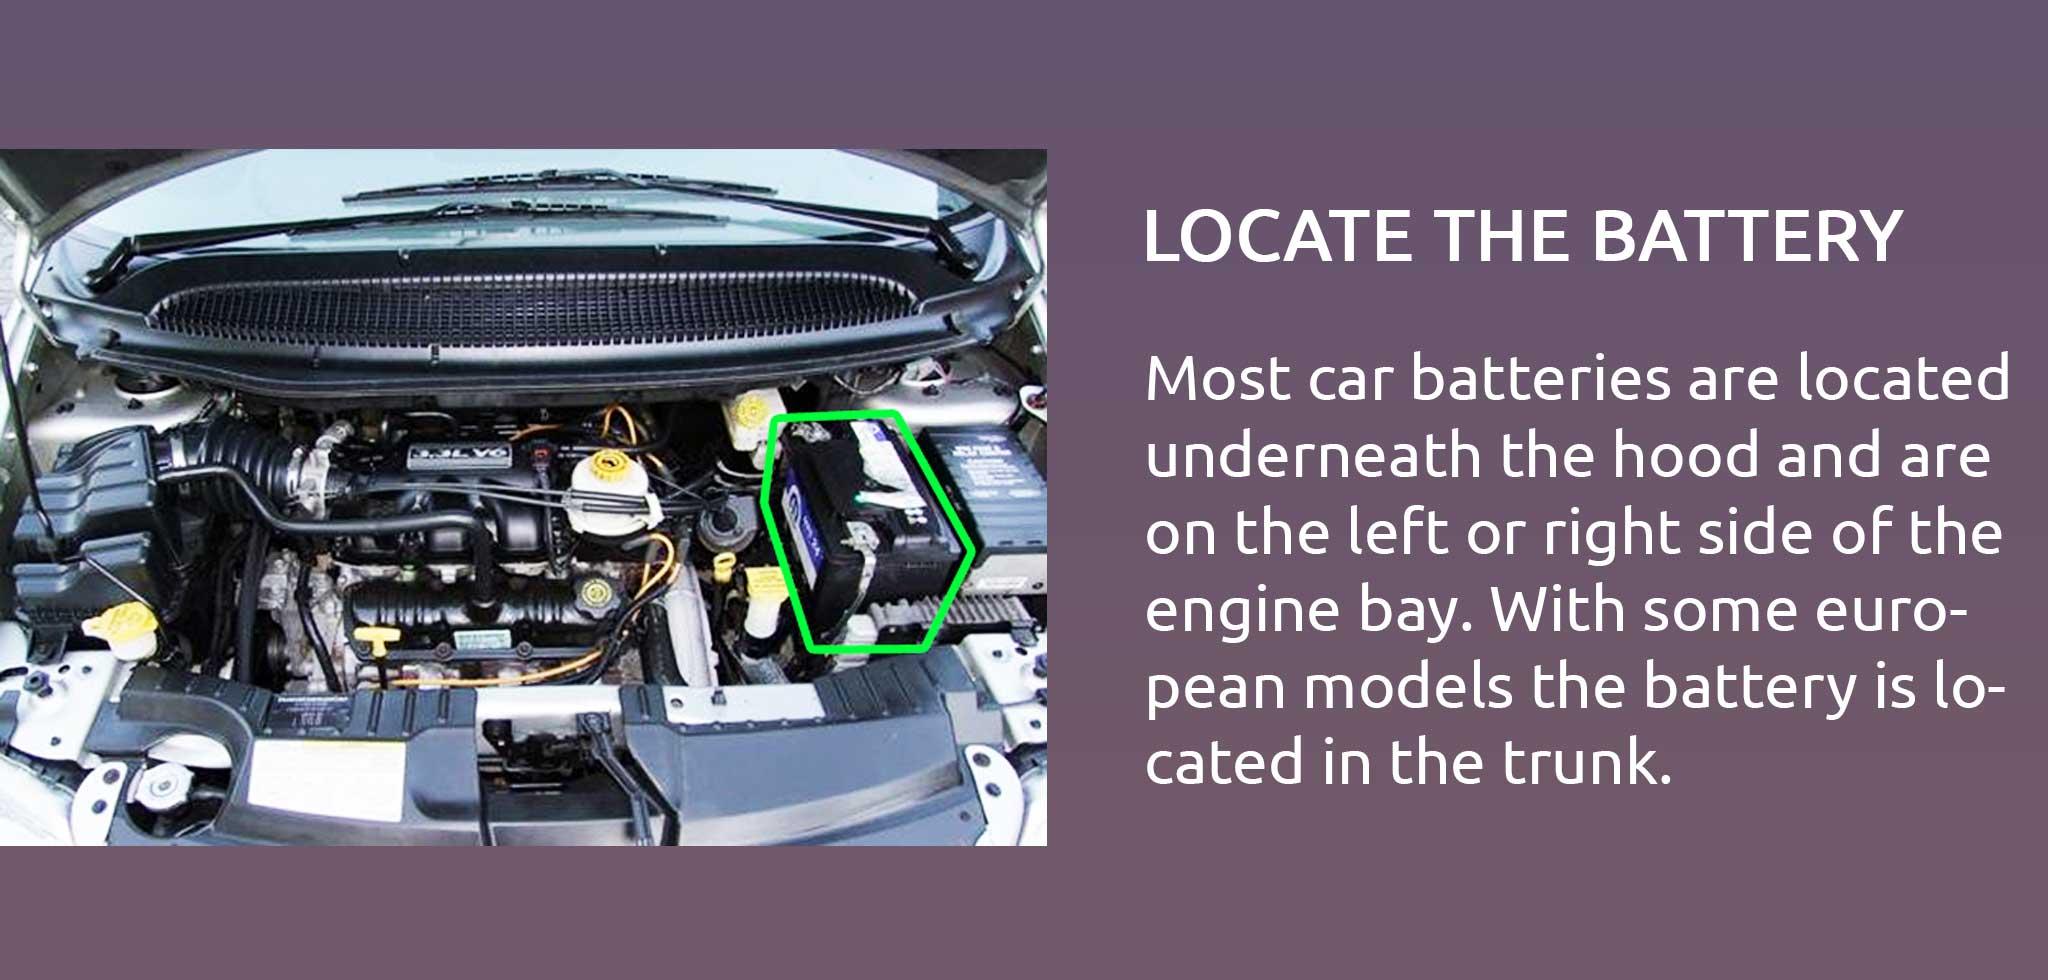 Most car batteries are located underneath the hood and are on the left or right side of the engine bay. With some european models the battery is located in the trunk.